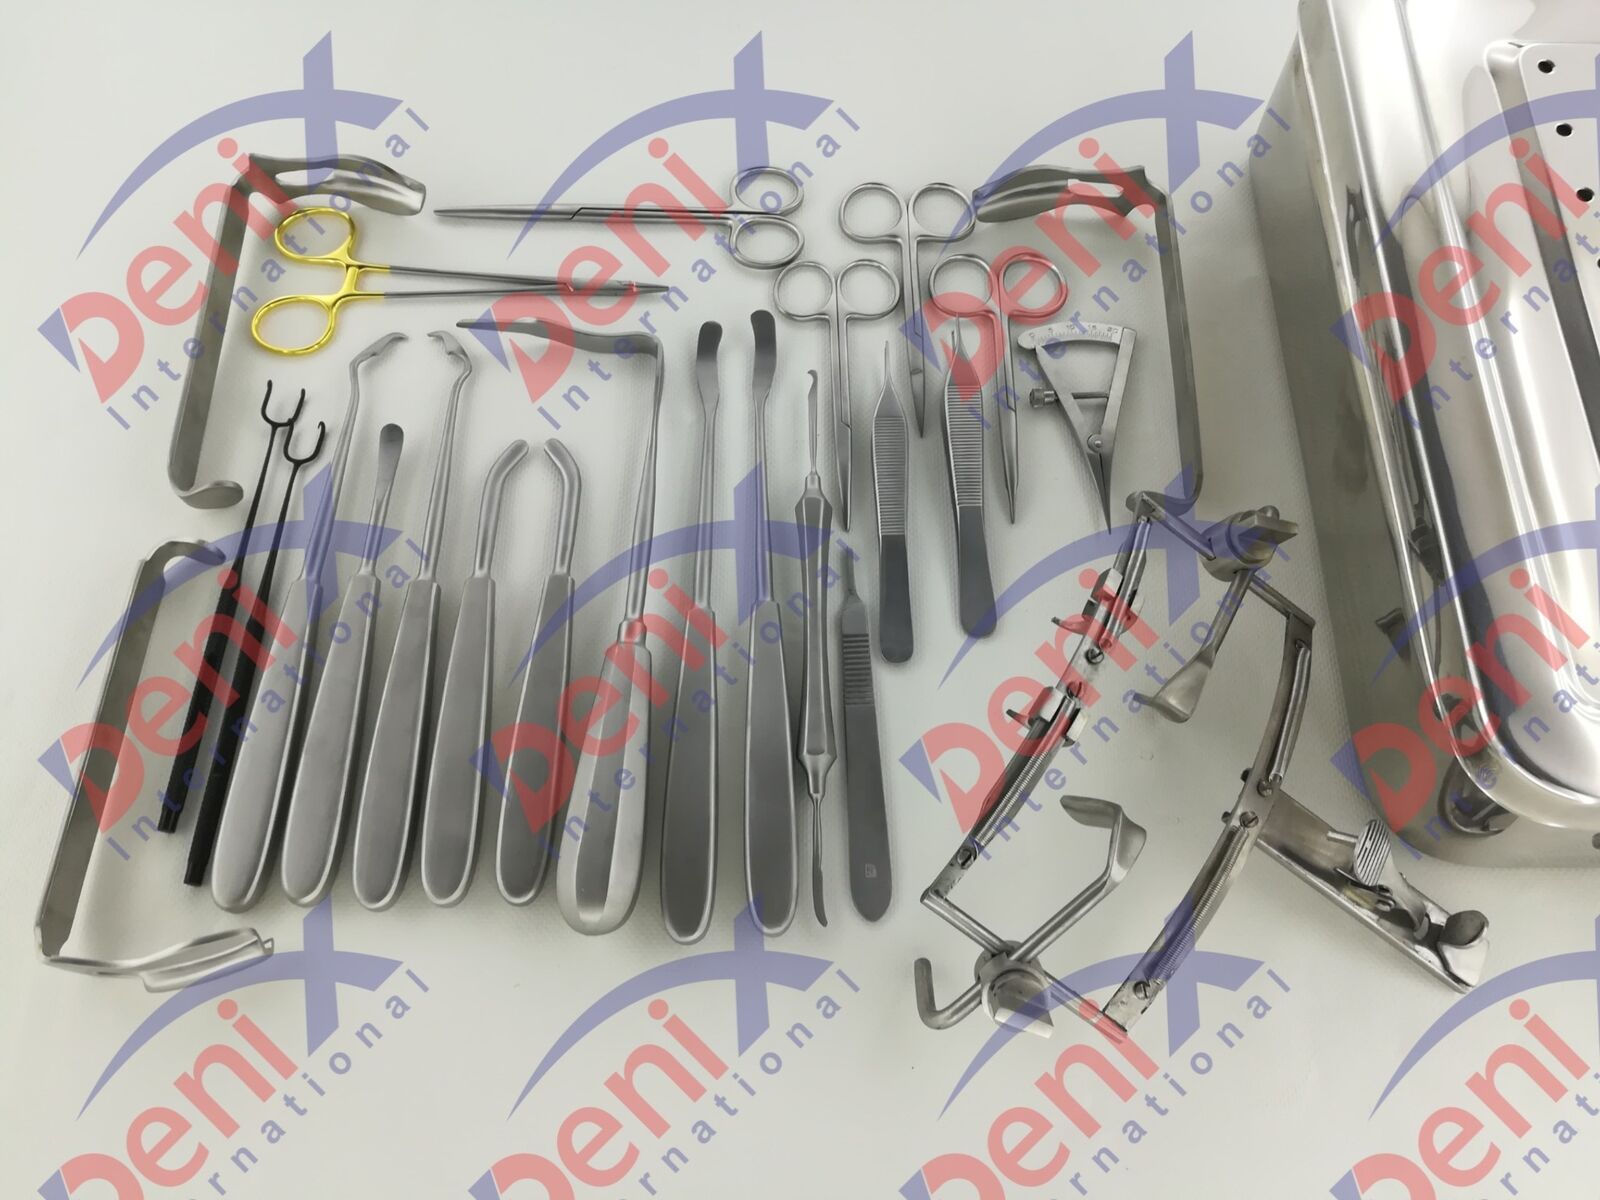 Cleft Palate Surgical Set New Consist Set of 25 PCS Surgical Instruments